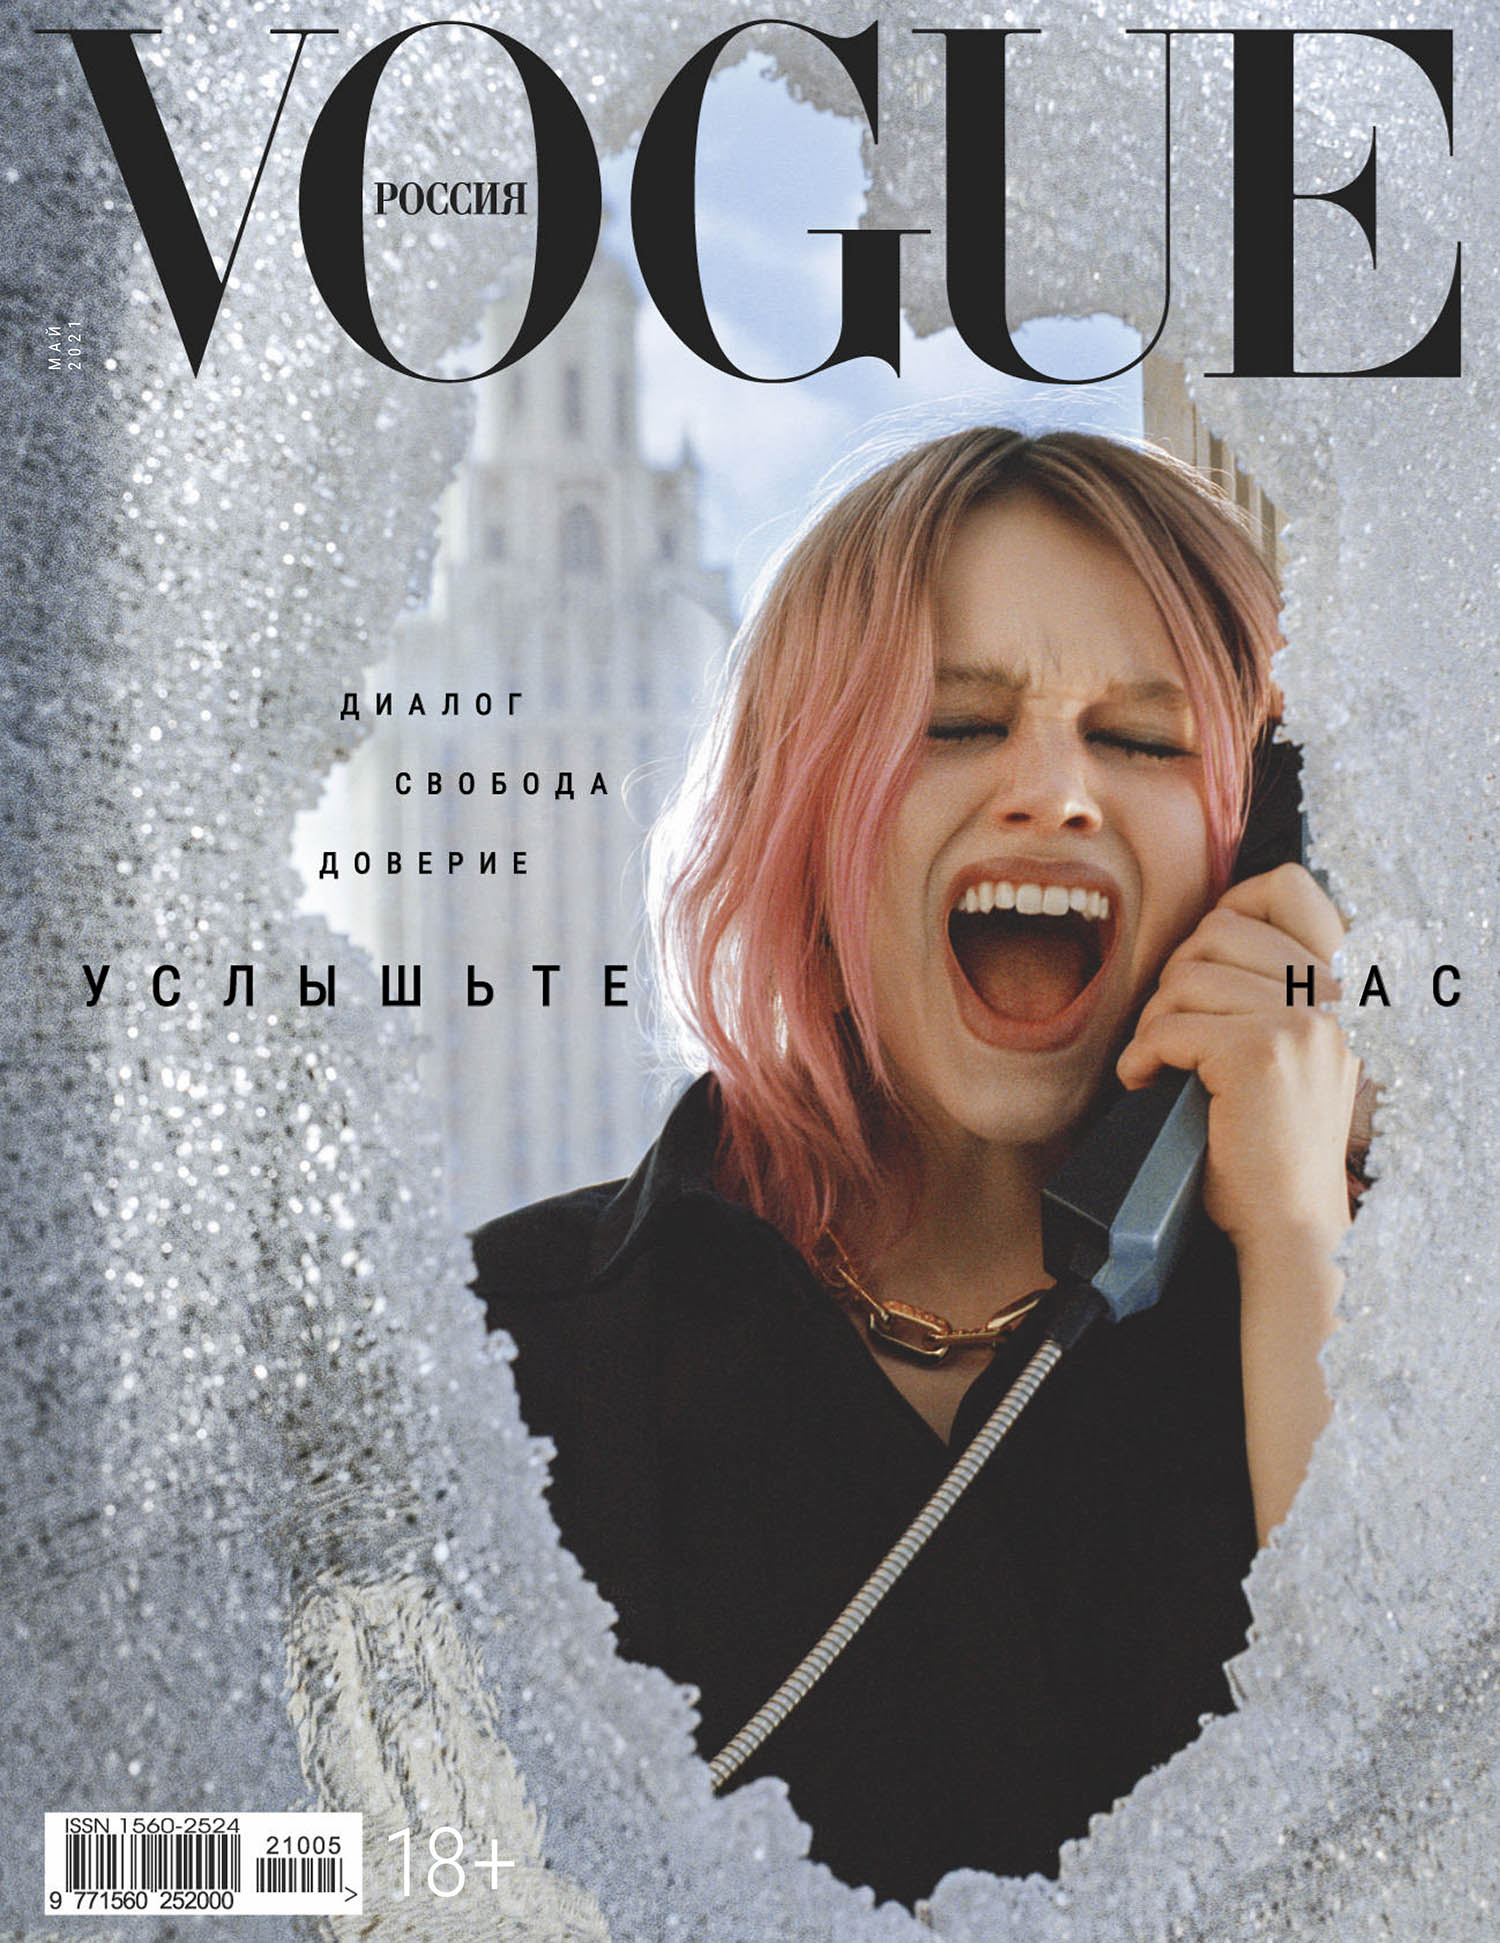 Simona Kust covers Vogue Russia May 2021 by Emmie America